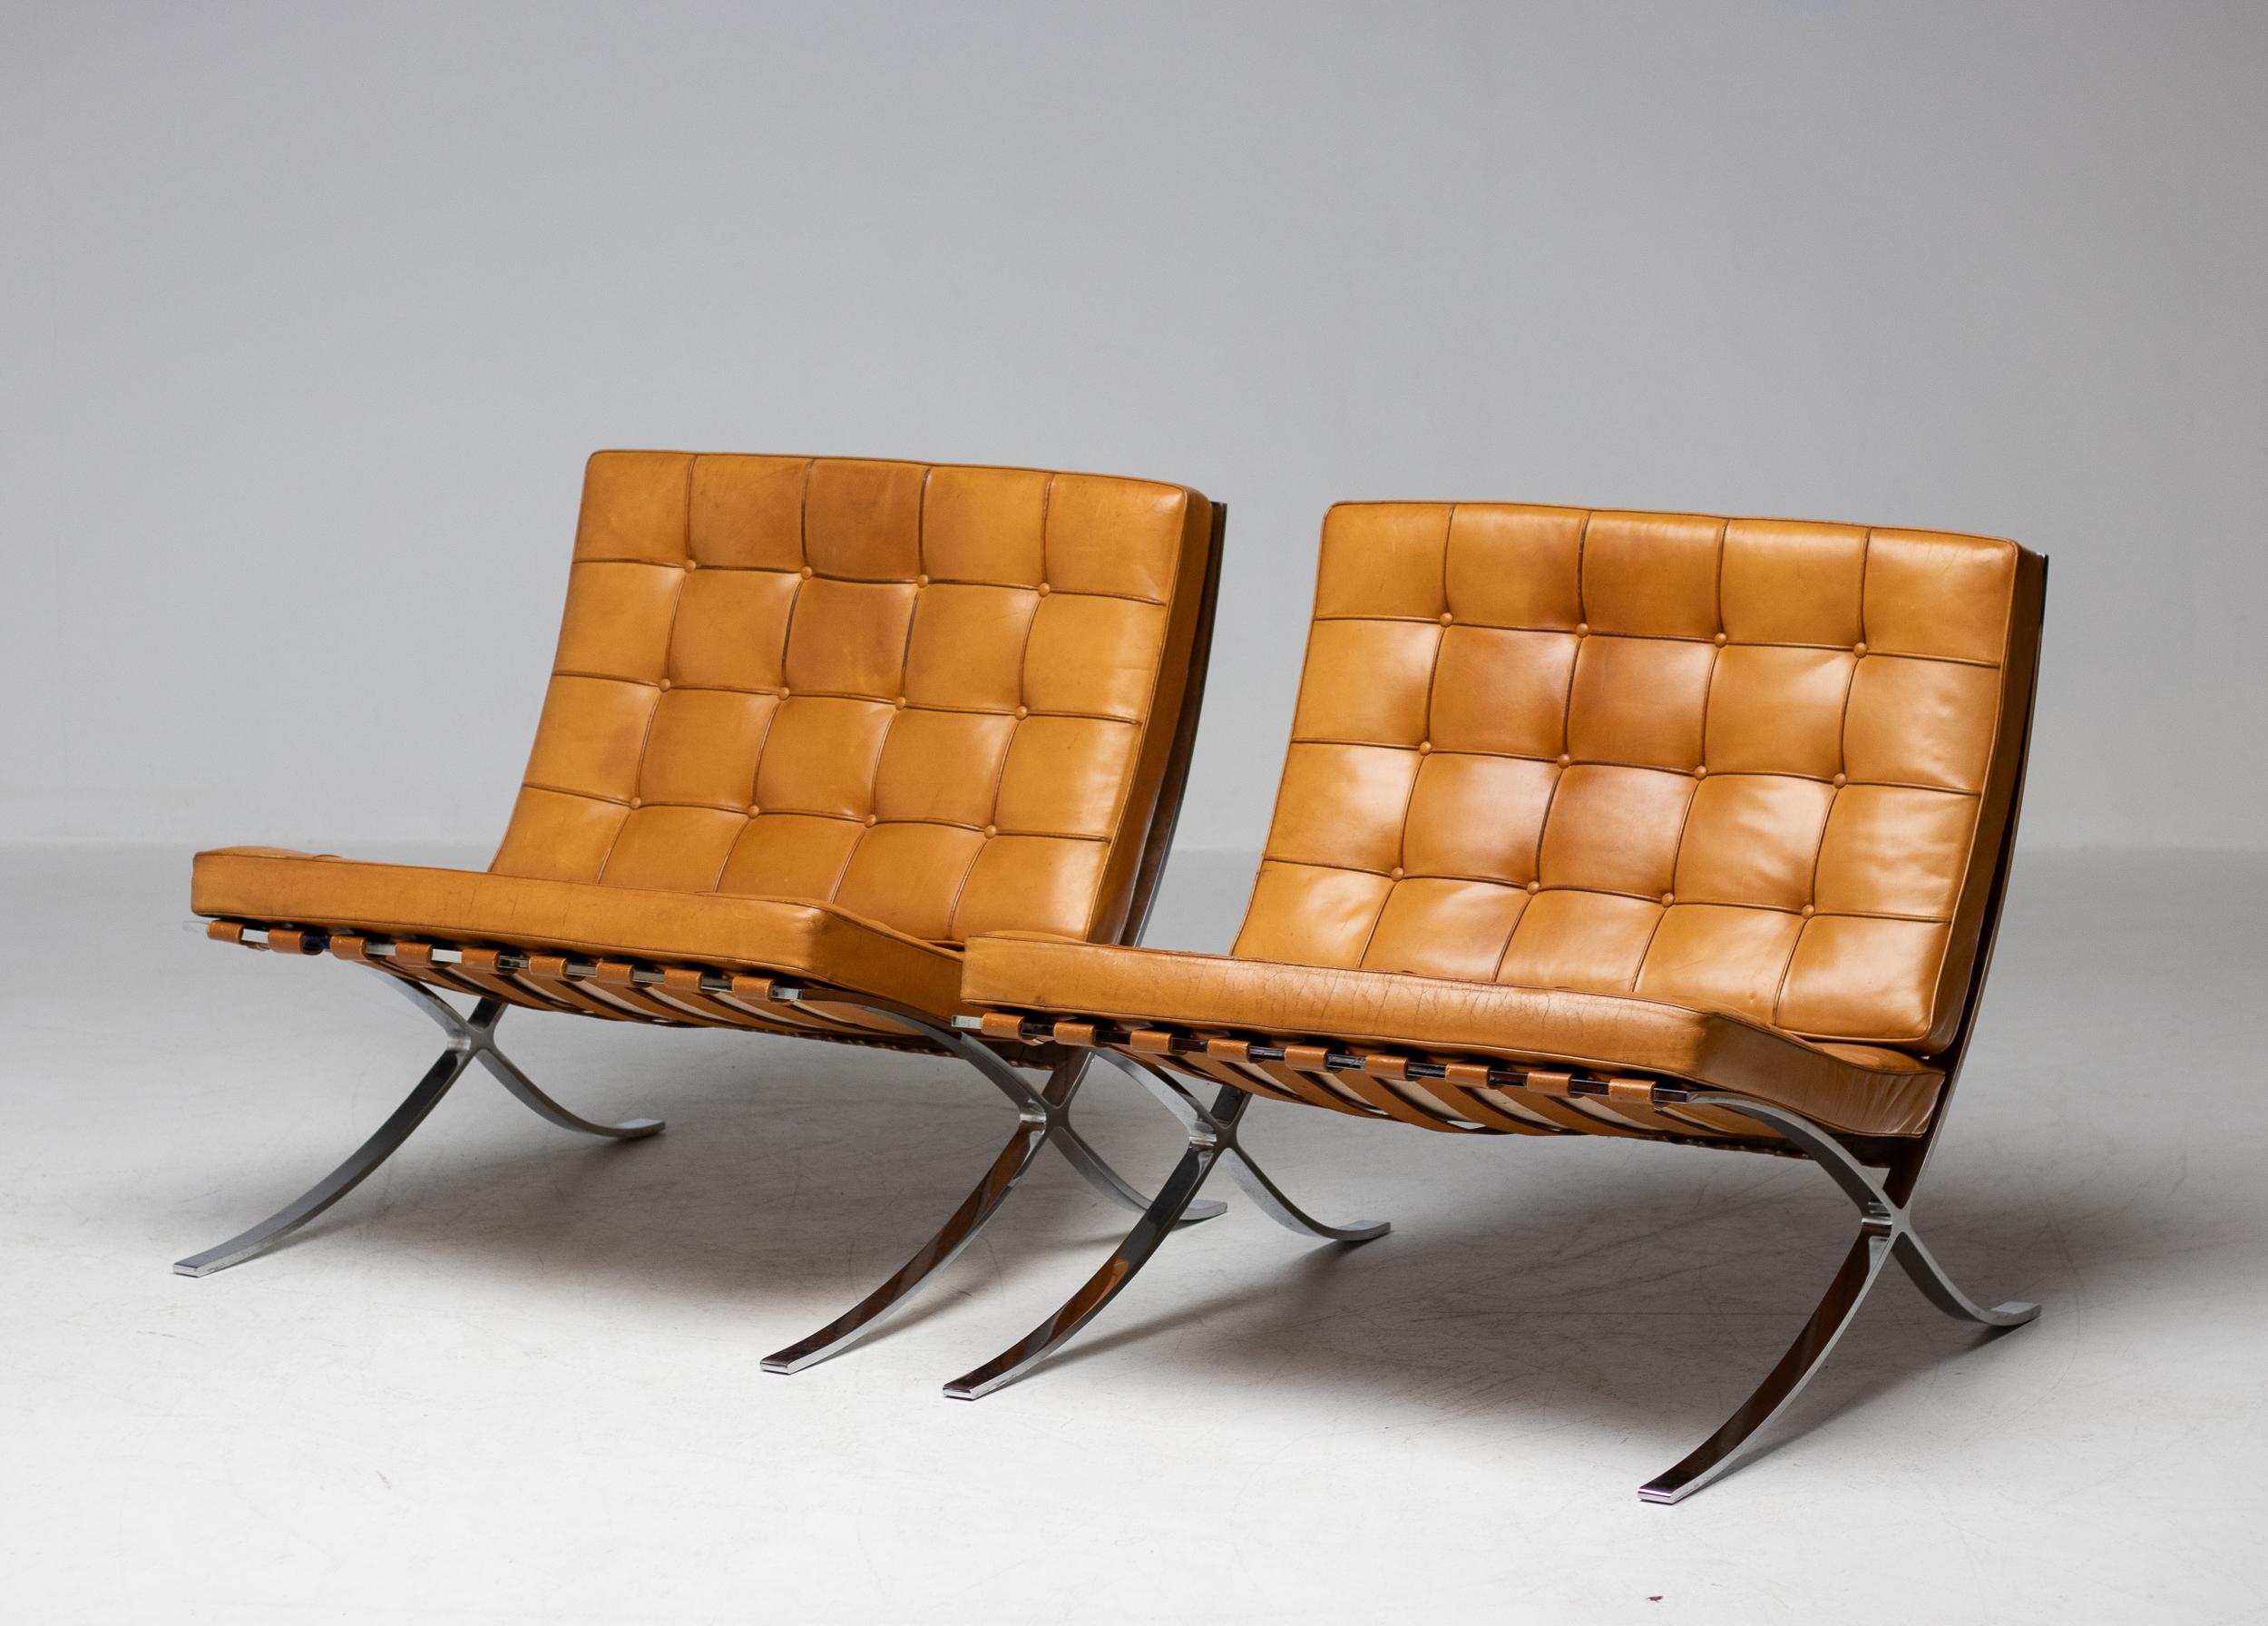 Pair of Knoll Cognac Leather Mies van der Rohe Split Frame Barcelona Chairs 6